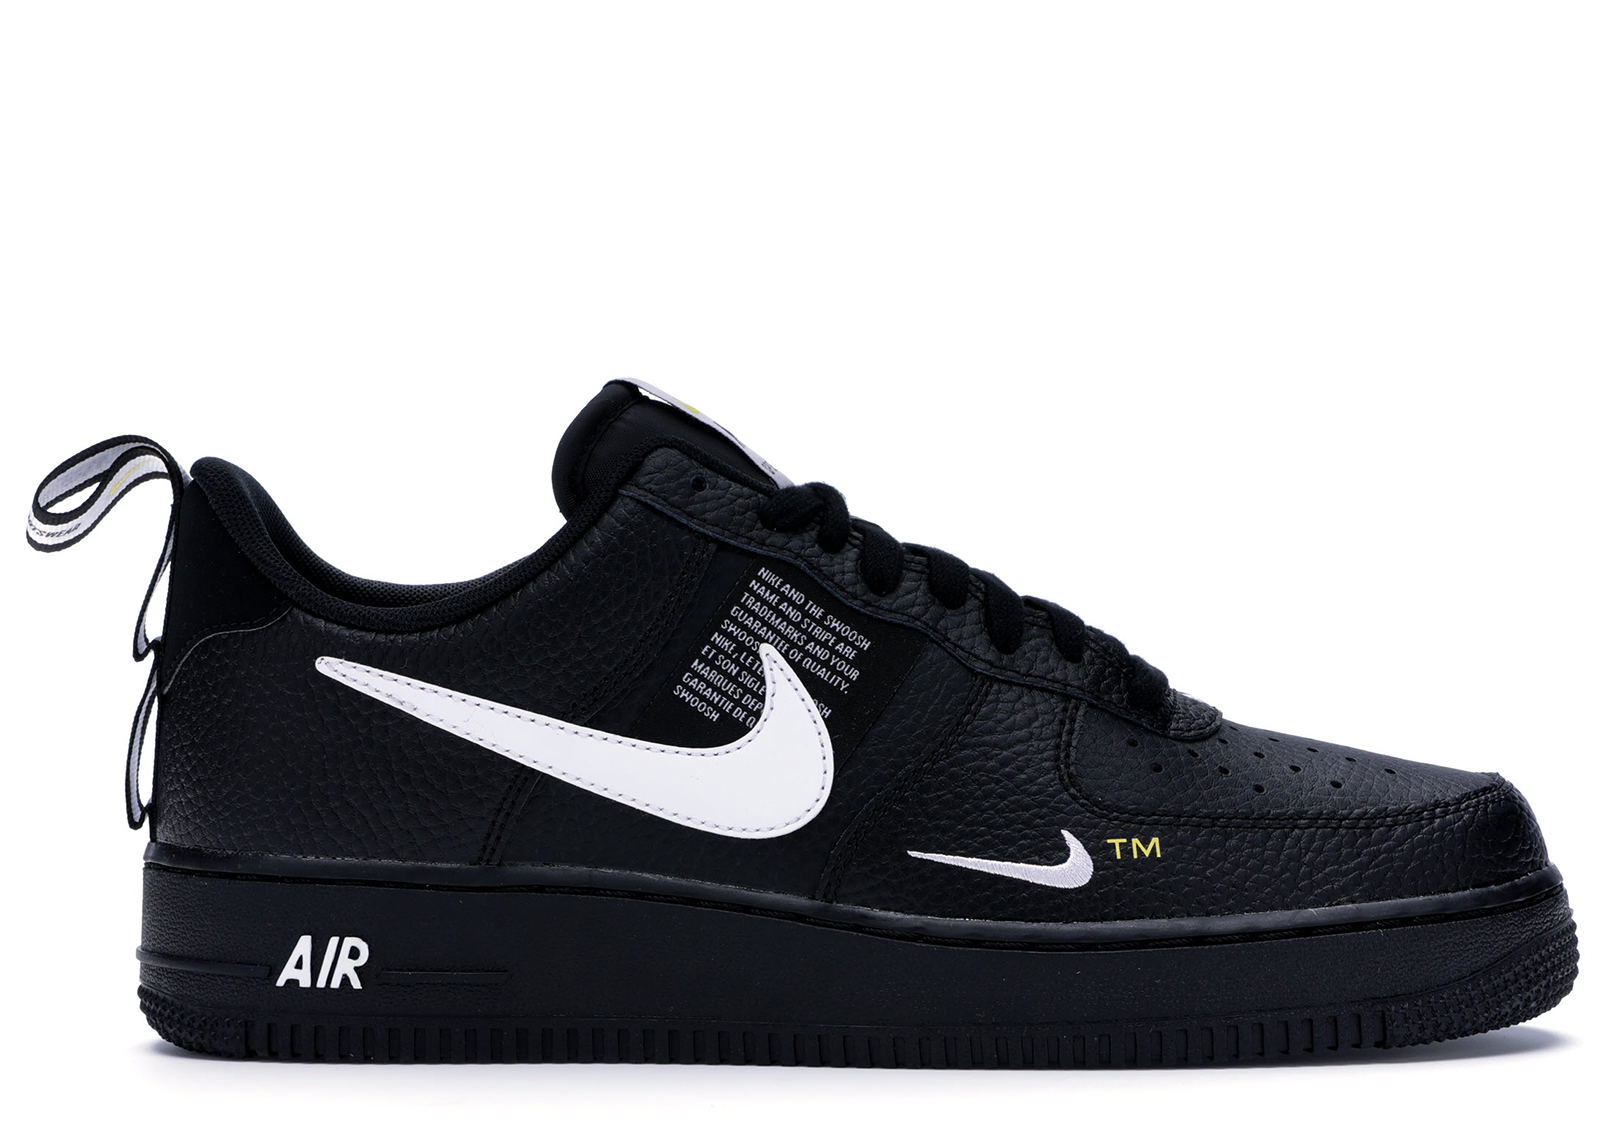 air force 1 lvl 8 utility